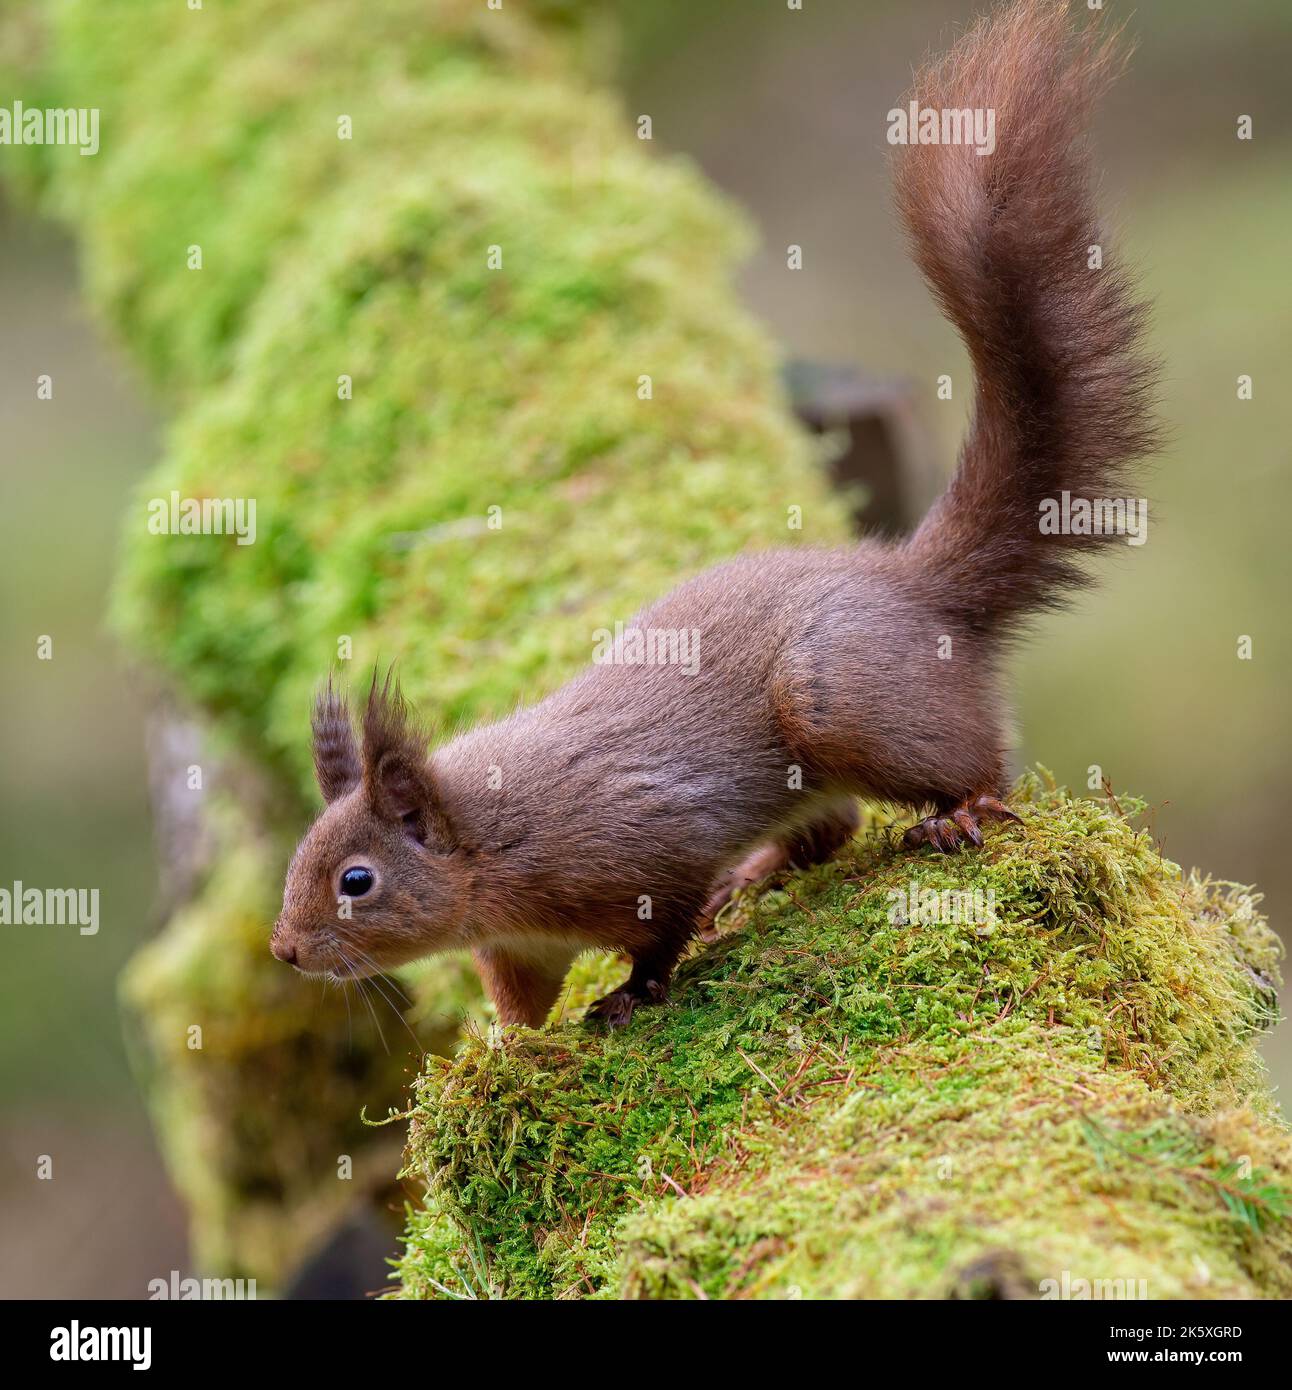 Red Squirrel, Sciurus vulgaris, on a lichen covered log, side view. Stock Photo